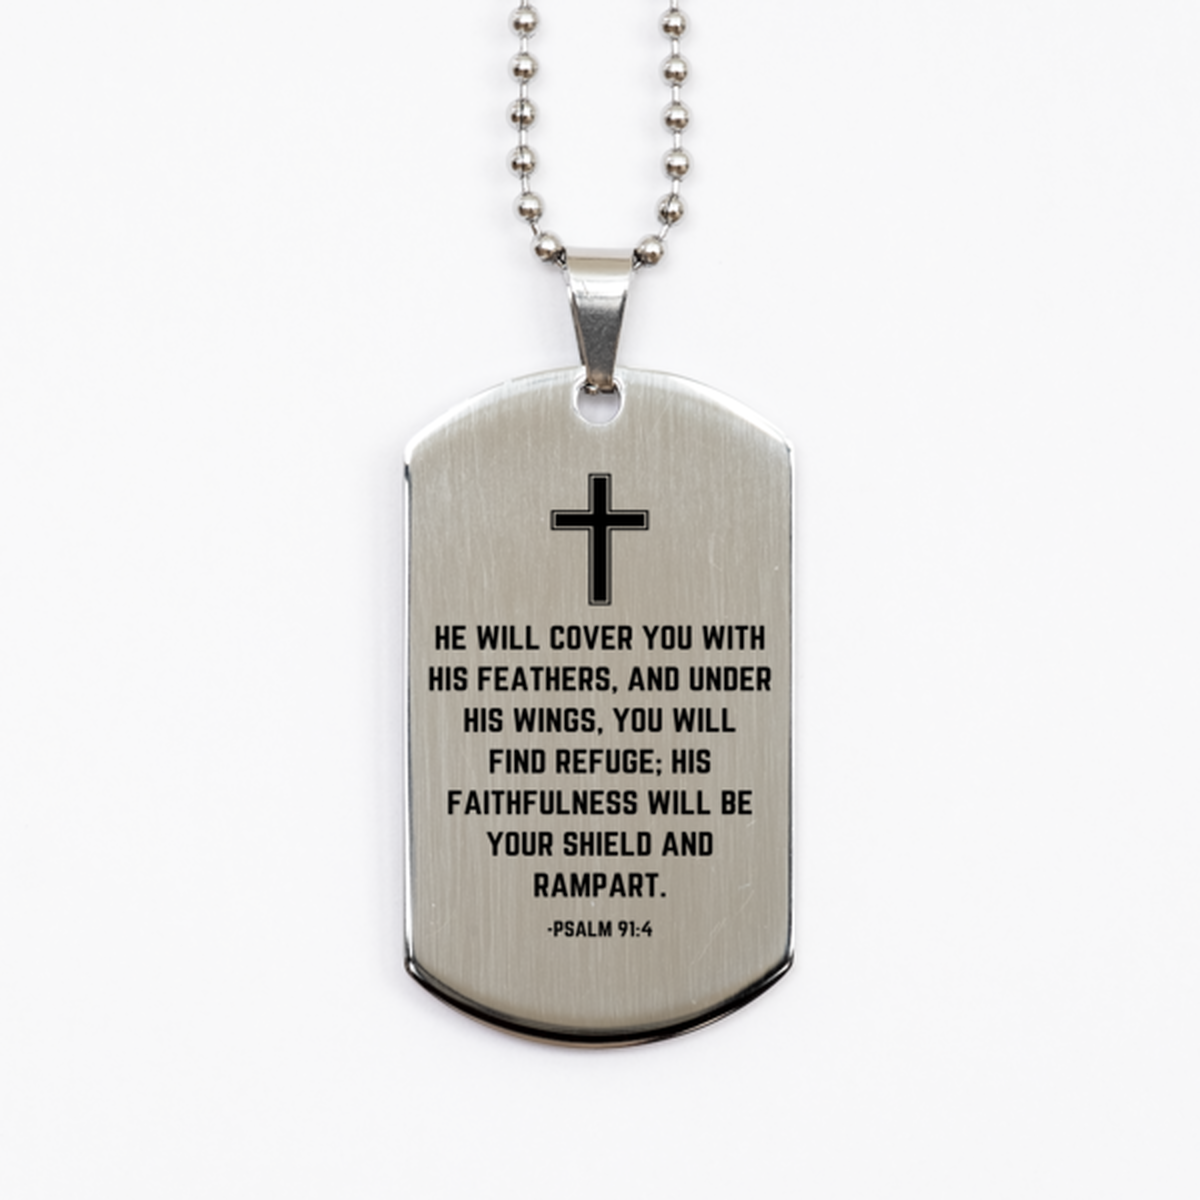 Baptism Gifts For Teenage Boys Girls, Christian Bible Verse Silver Dog Tag, He will cover you with his feathers, Confirmation Gifts, Bible Verse Necklace for Son, Godson, Grandson, Nephew